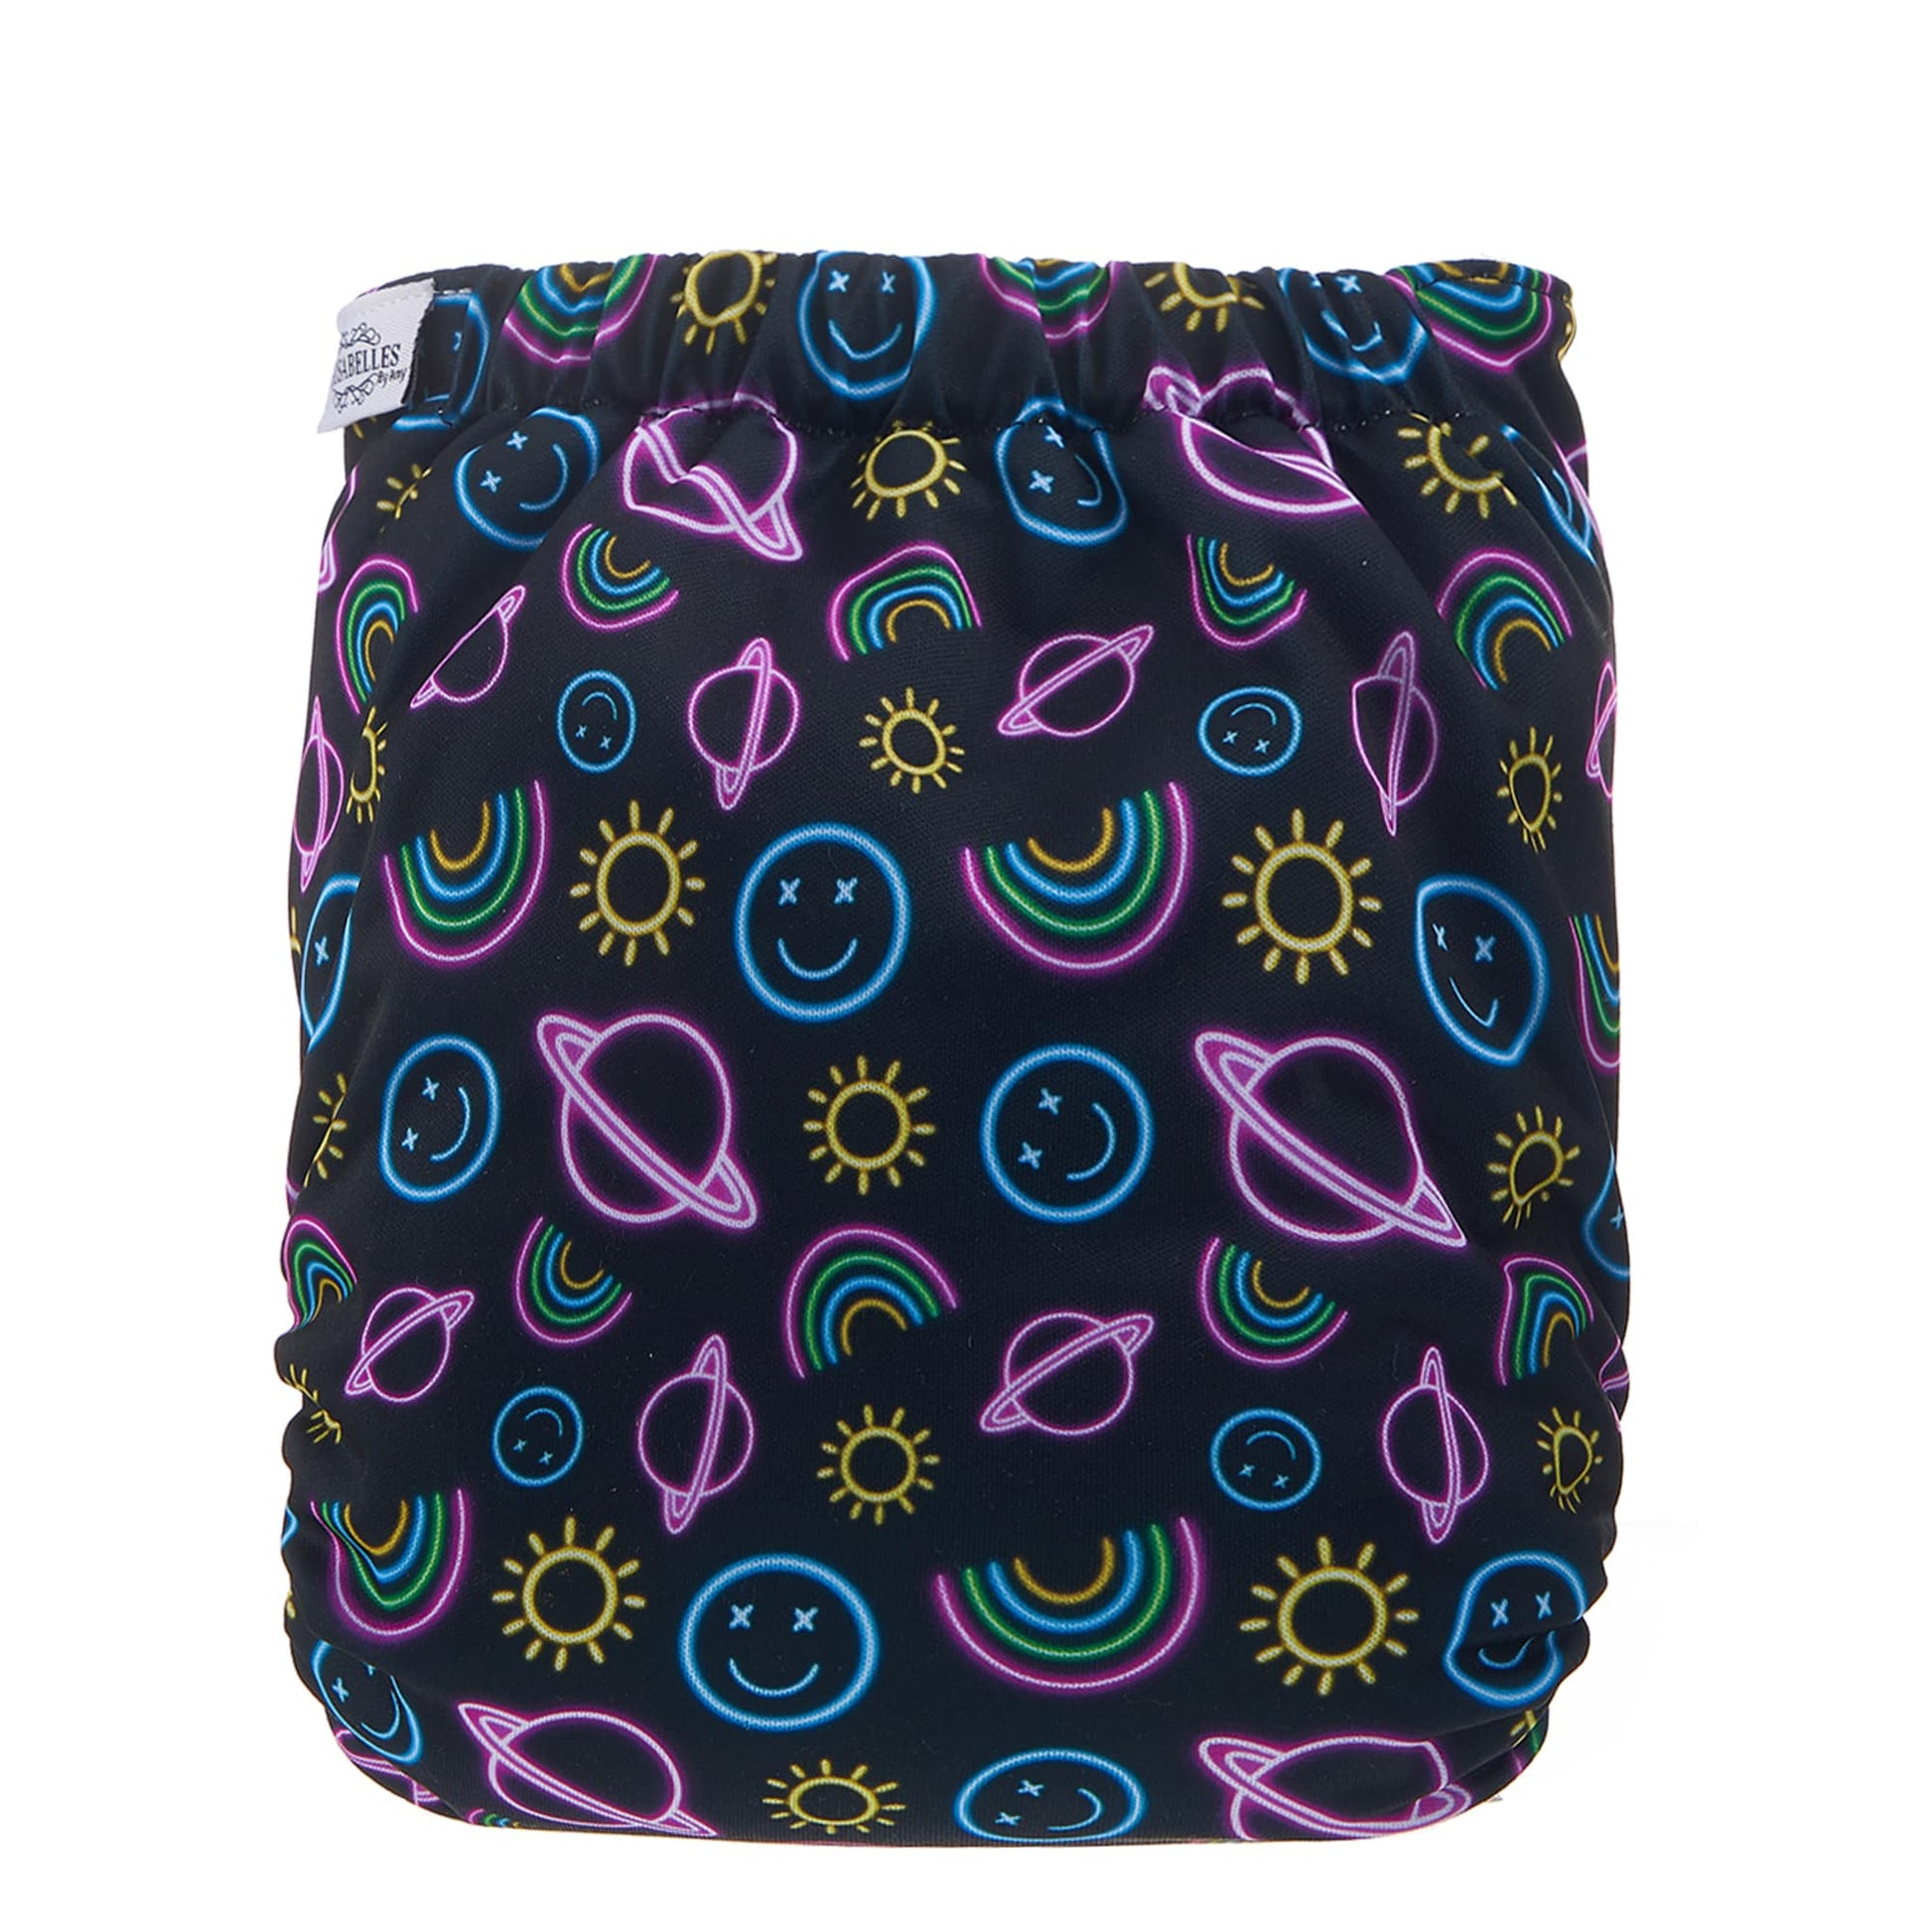 Bells Bumz Reusabelles All in Two Fliip Nappy Cover-All in Two Nappy-Bells Bumz-Colours in the Wind-The Nappy Market